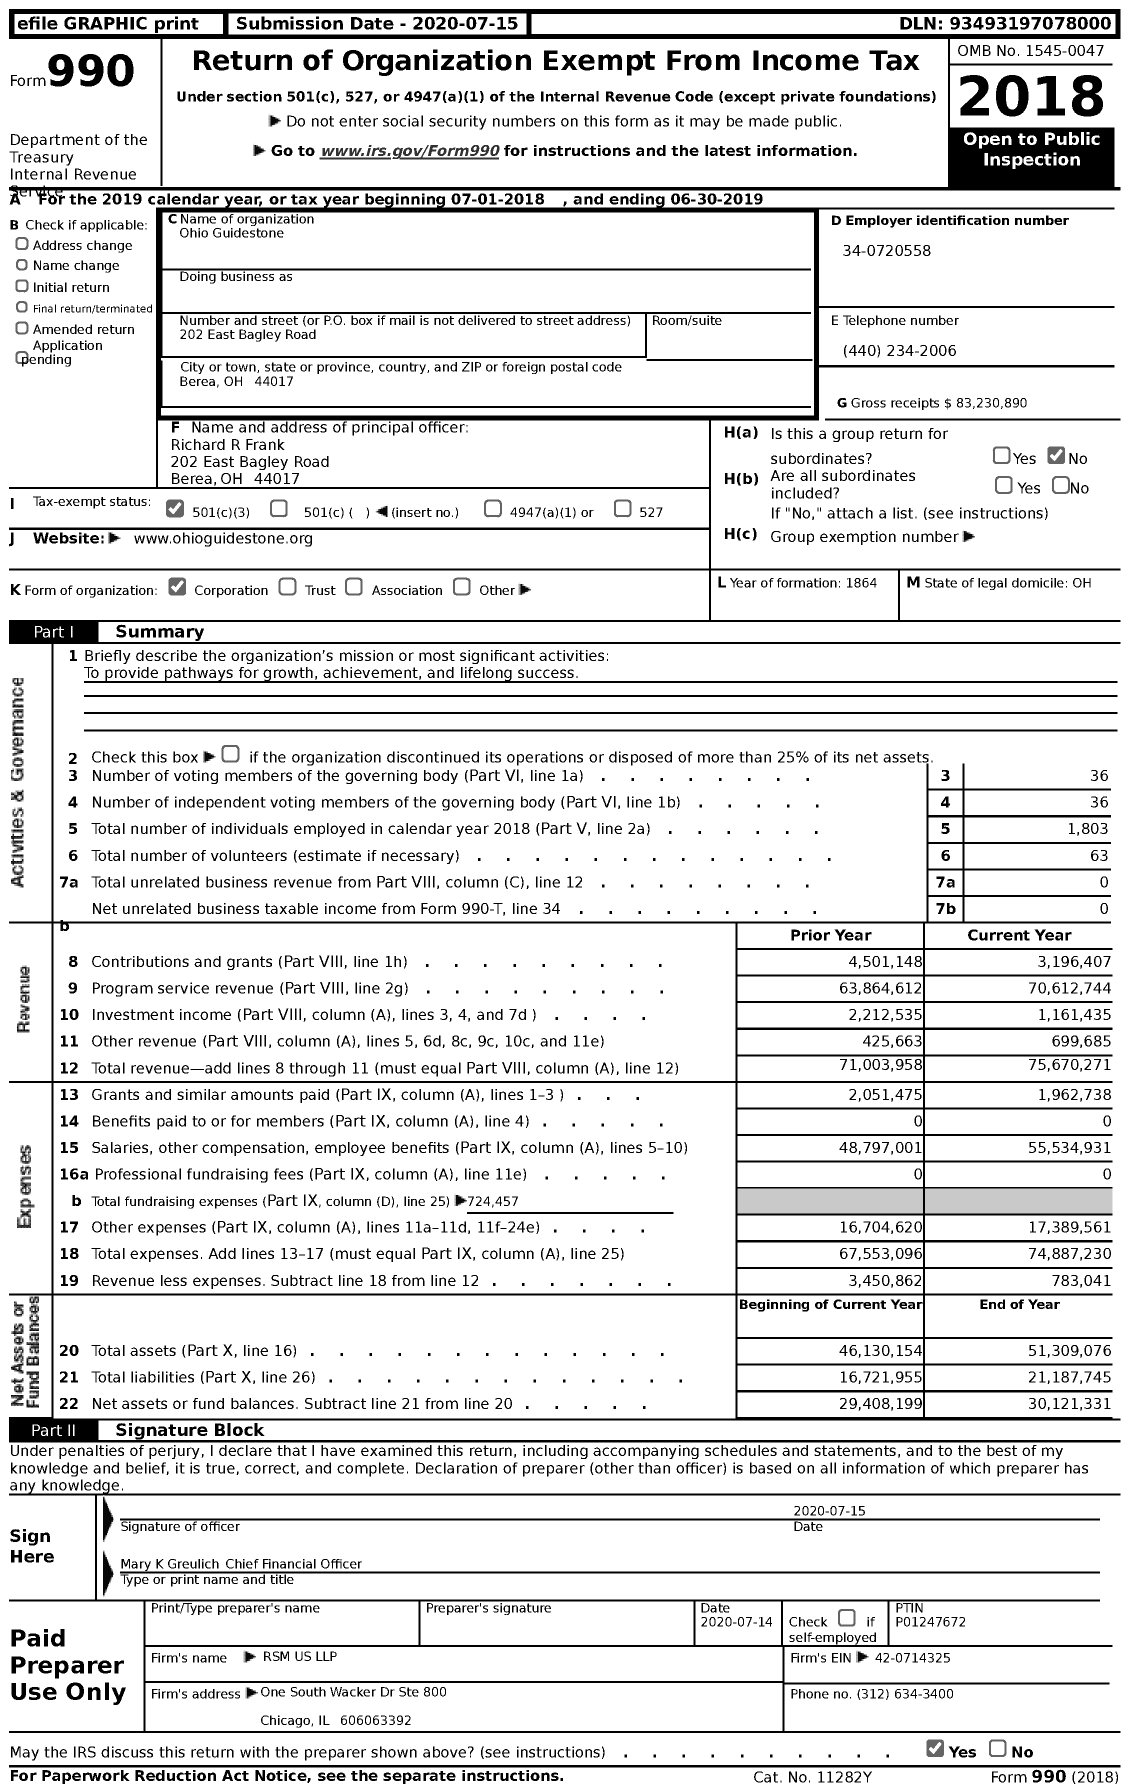 Image of first page of 2018 Form 990 for Ohioguidestone (OG)